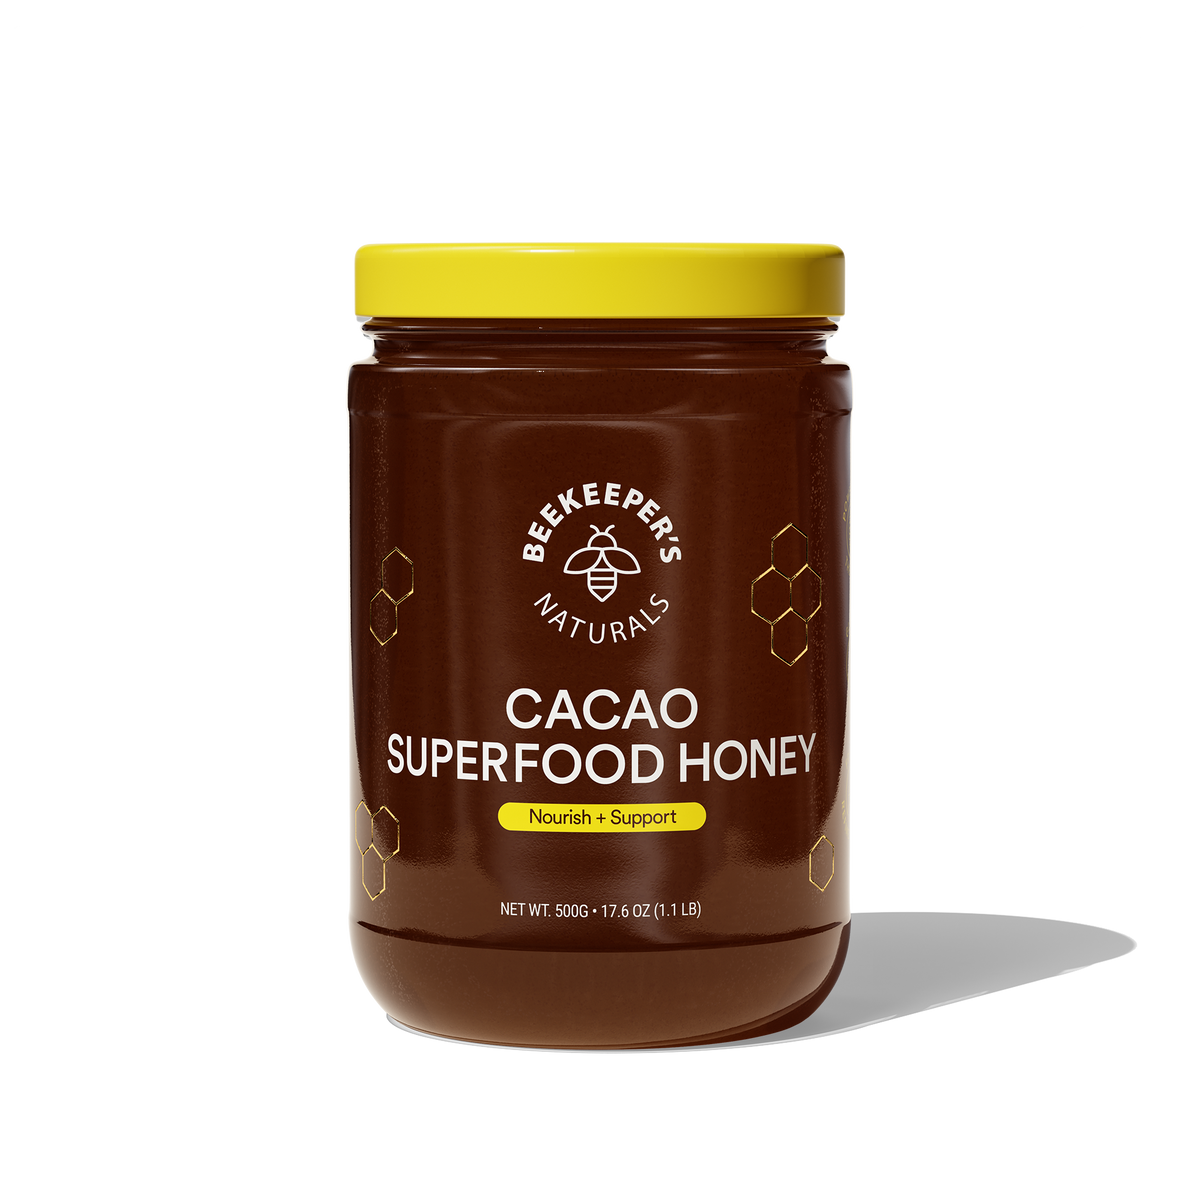 Cacao Superfood Honey